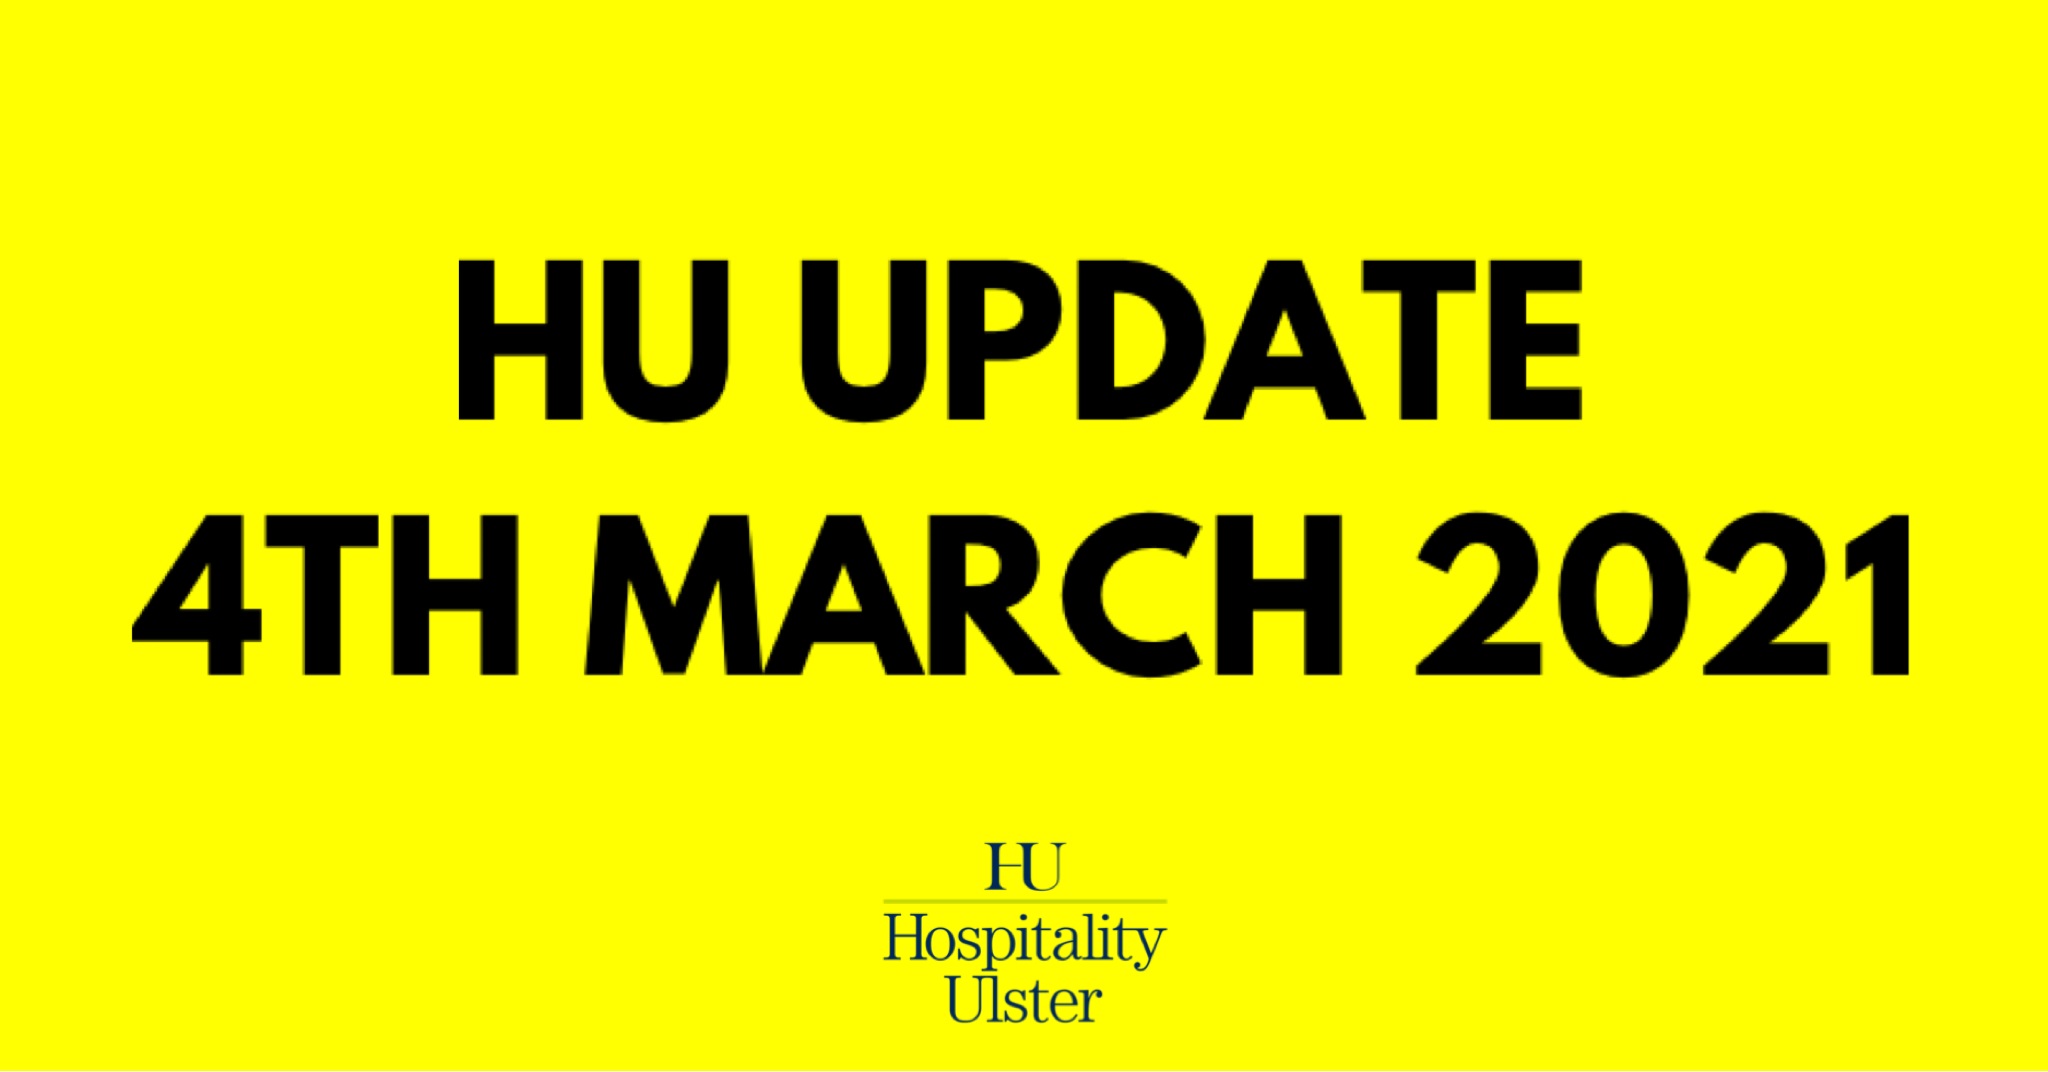 HU UPDATE - BUDGET - SUPPORT - AND MORE